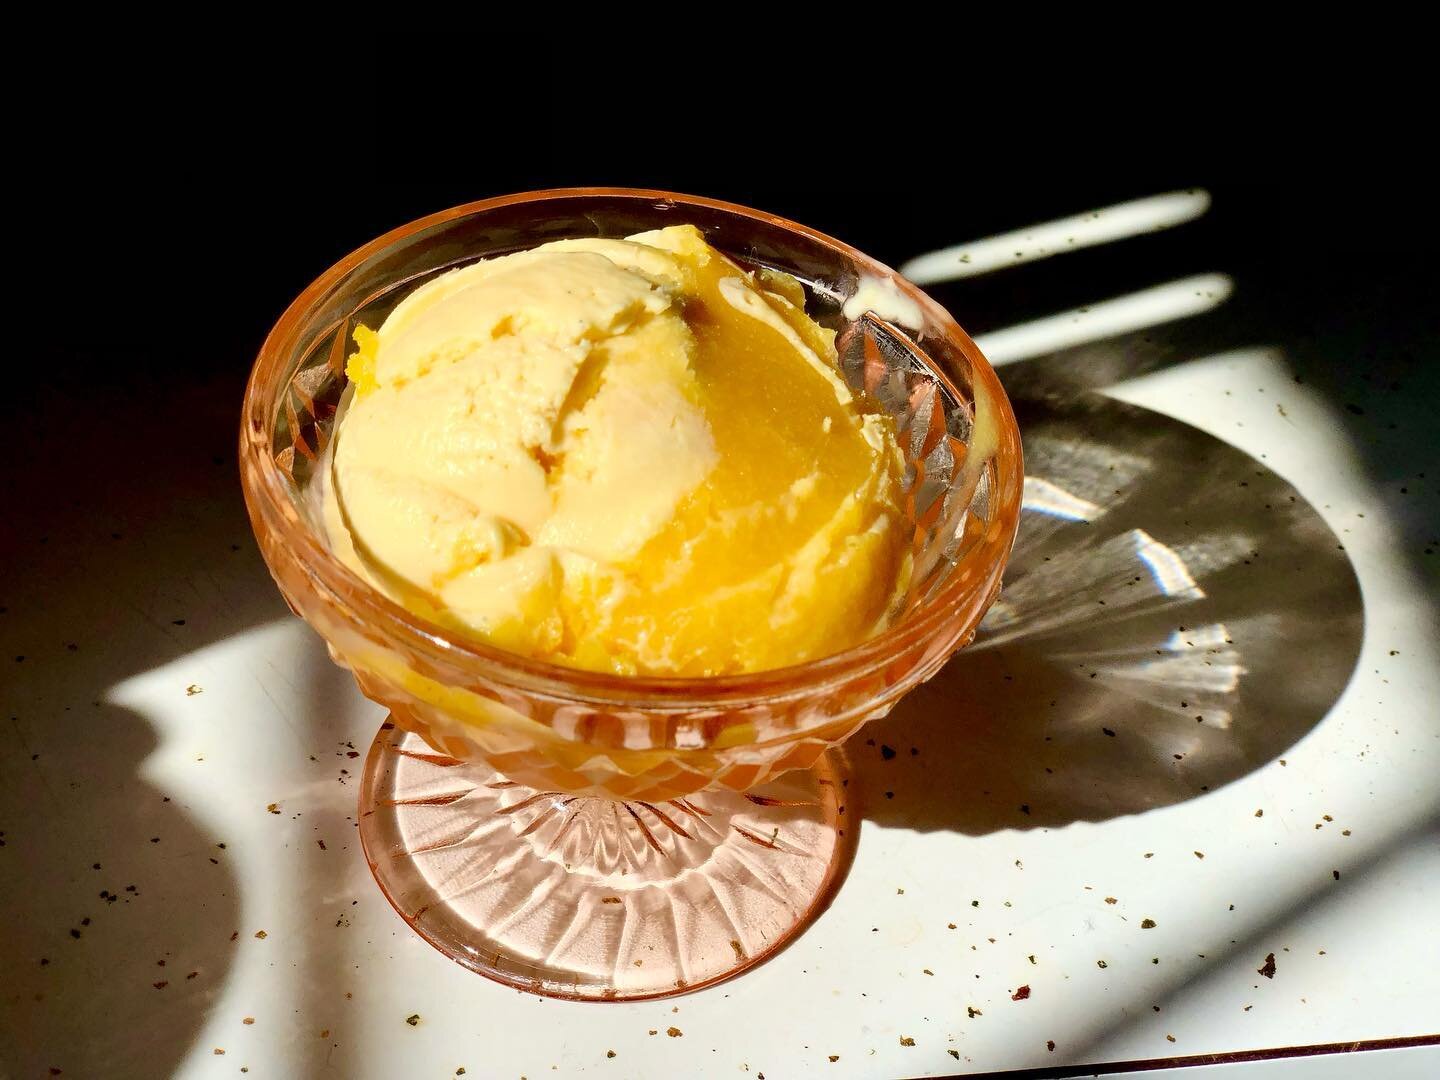 the latest in my quest for Nirvana

mango sorbet layered with toasted coconut ice cream